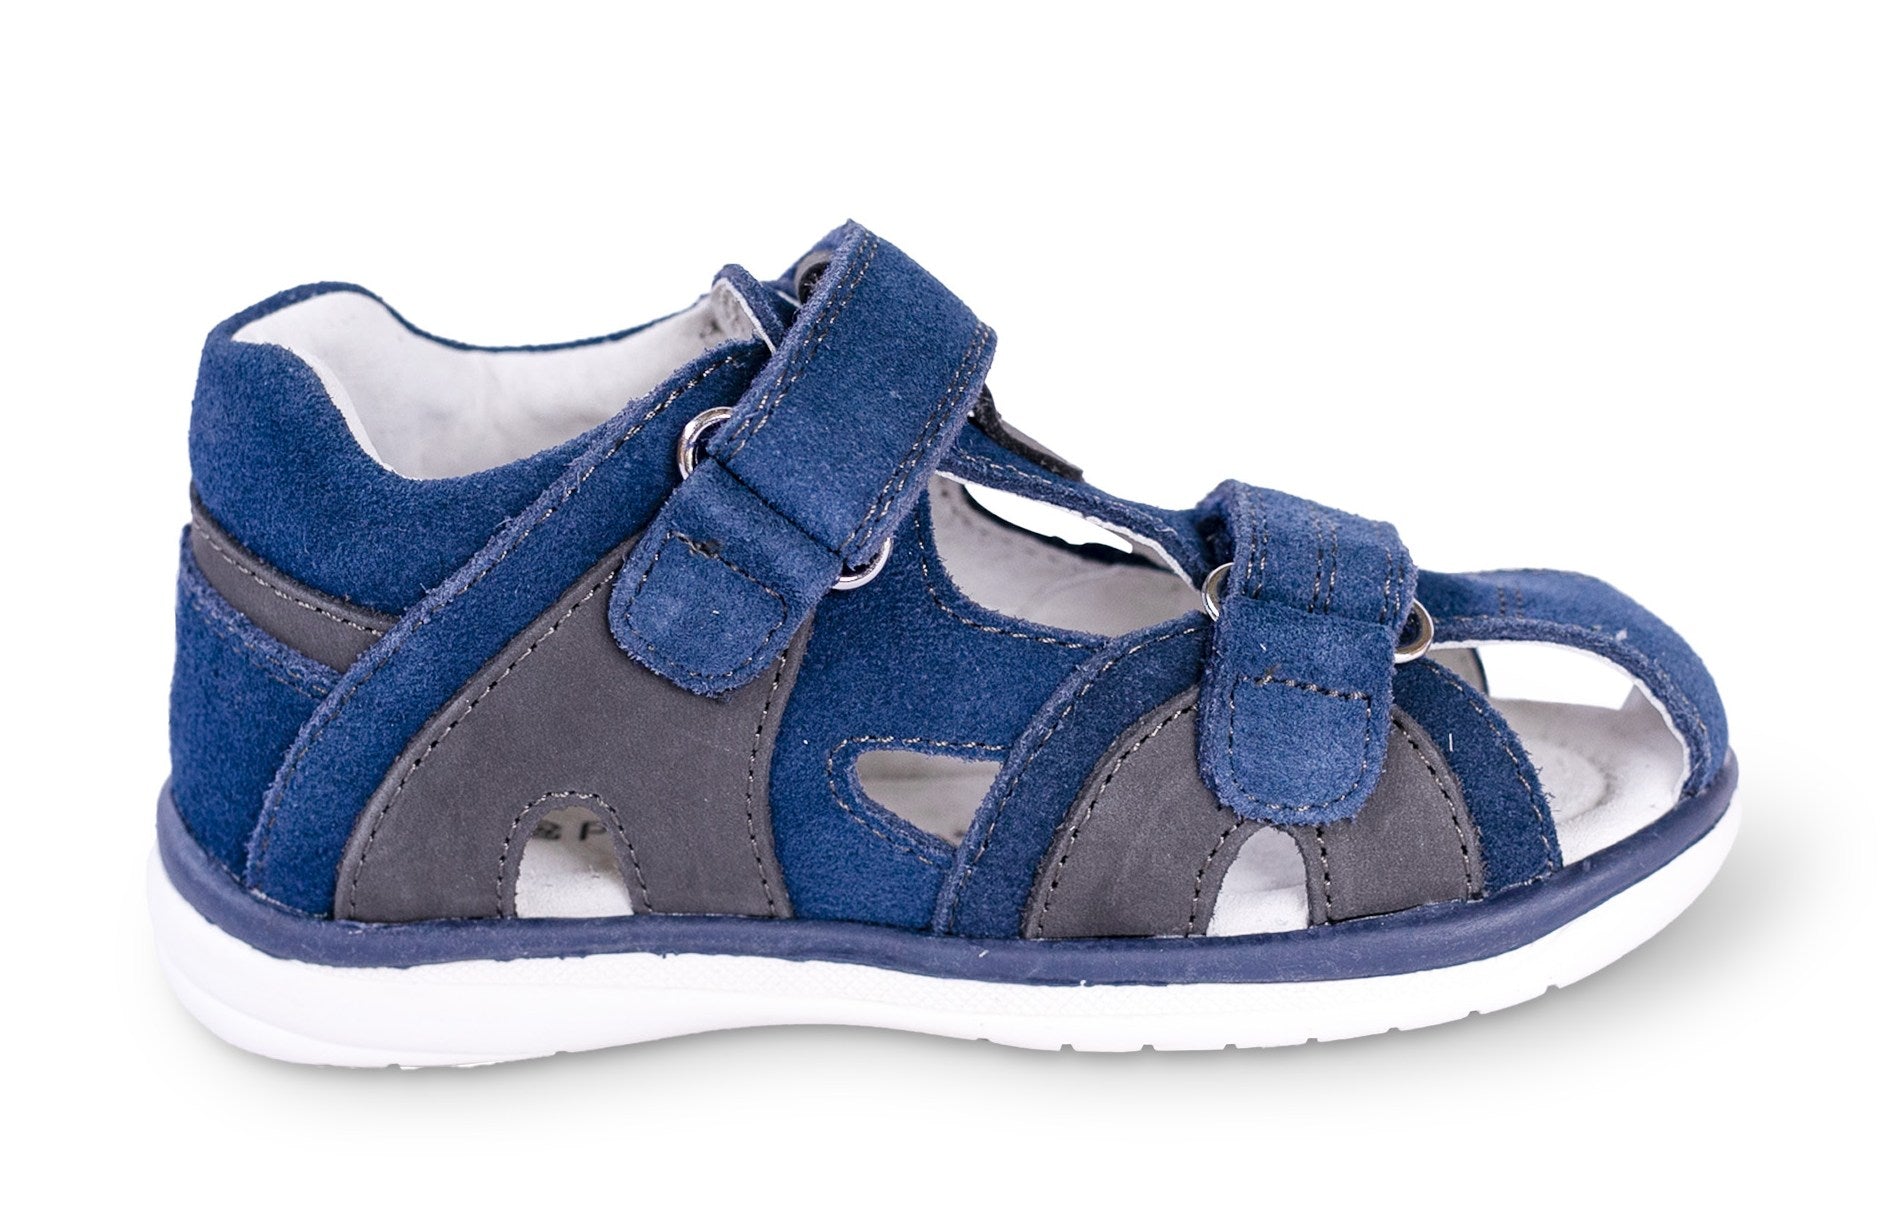 LANDON toddler boy arch support sandals - feelgoodshoes.ae